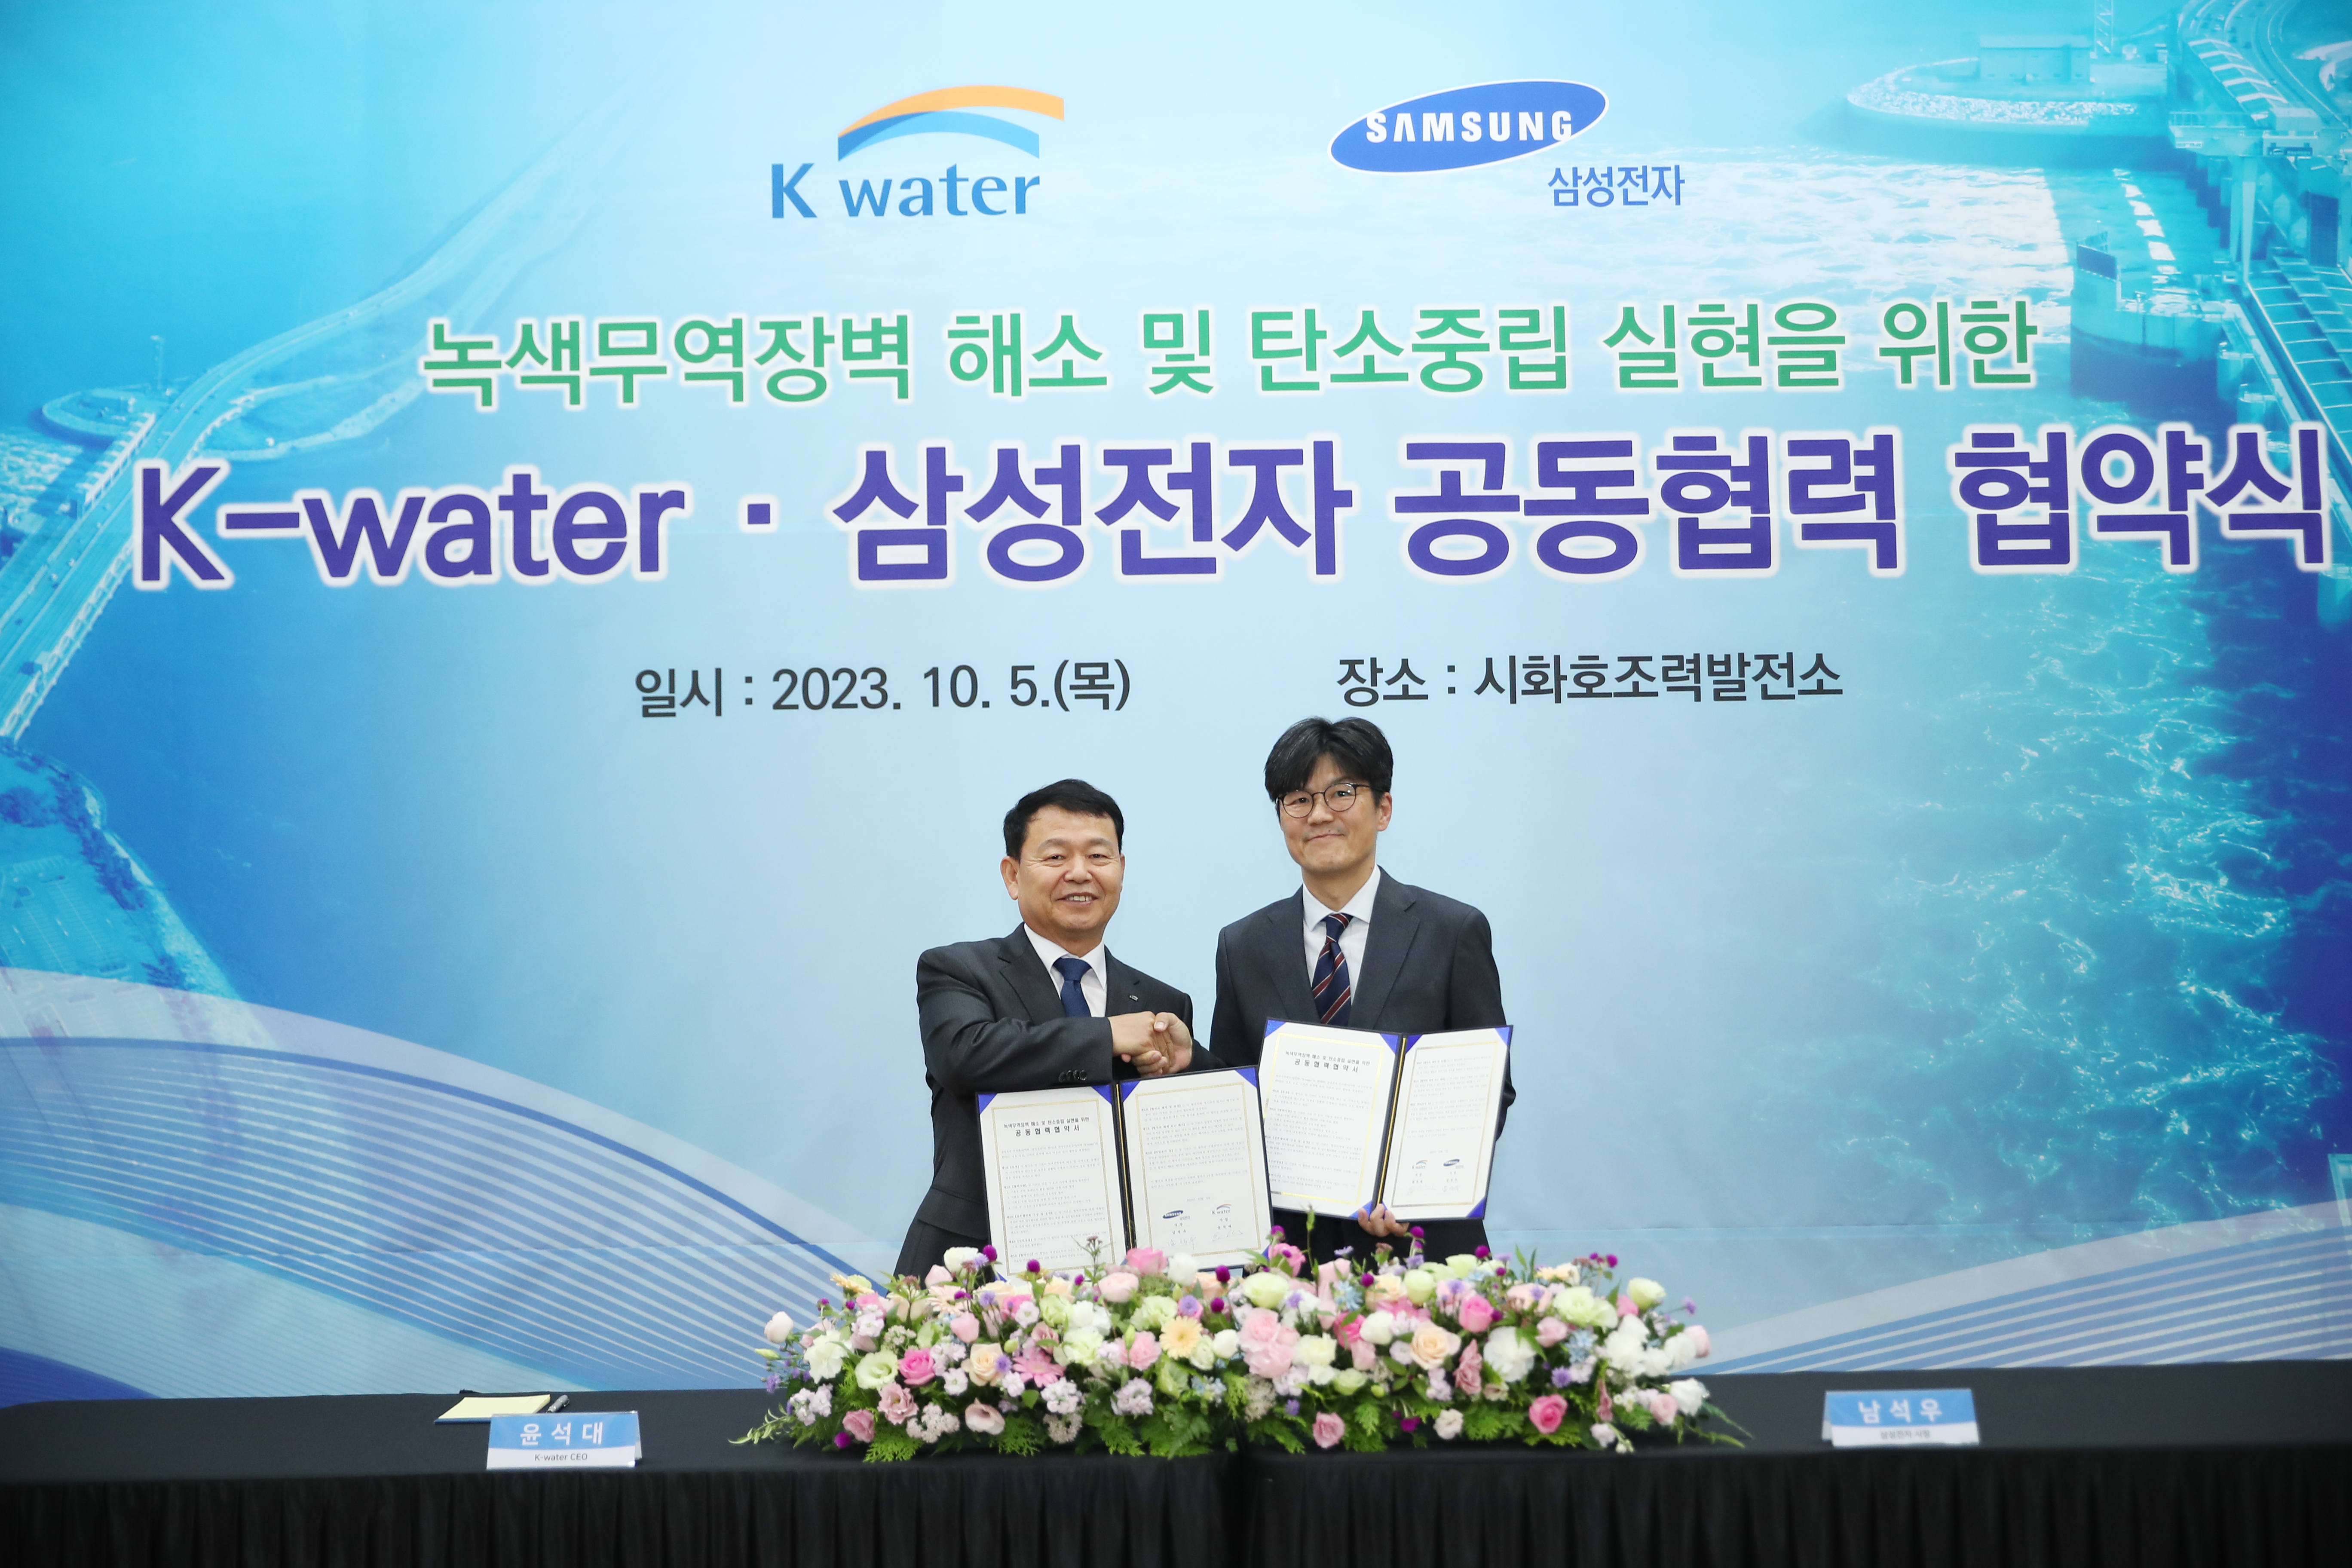 Samsung Electronics Joint Cooperation Agreement Ceremony